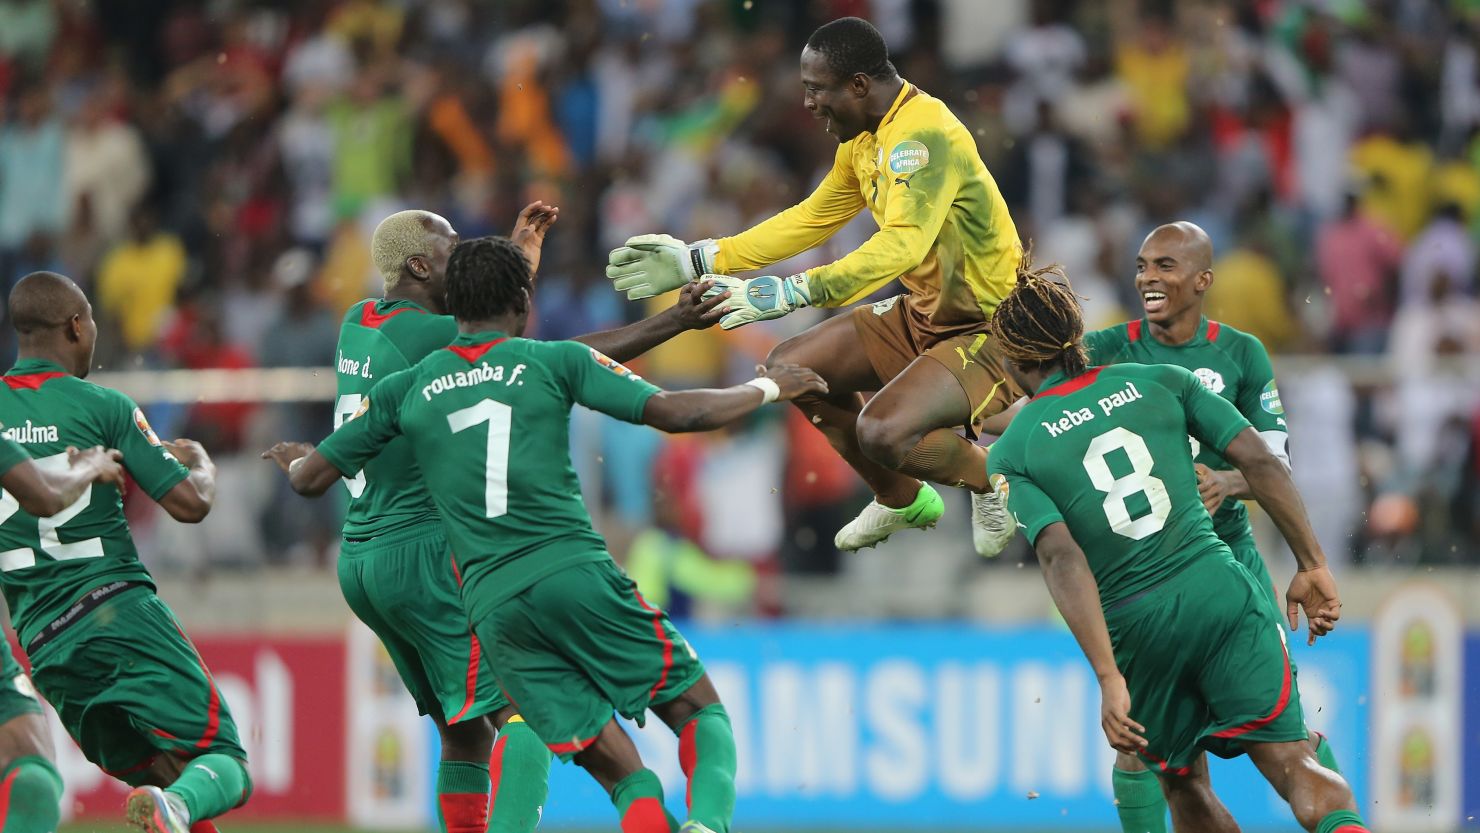 Burkina Faso's players celebrate their victory over Ghana in the semifinal at the Africa Cup of Nations